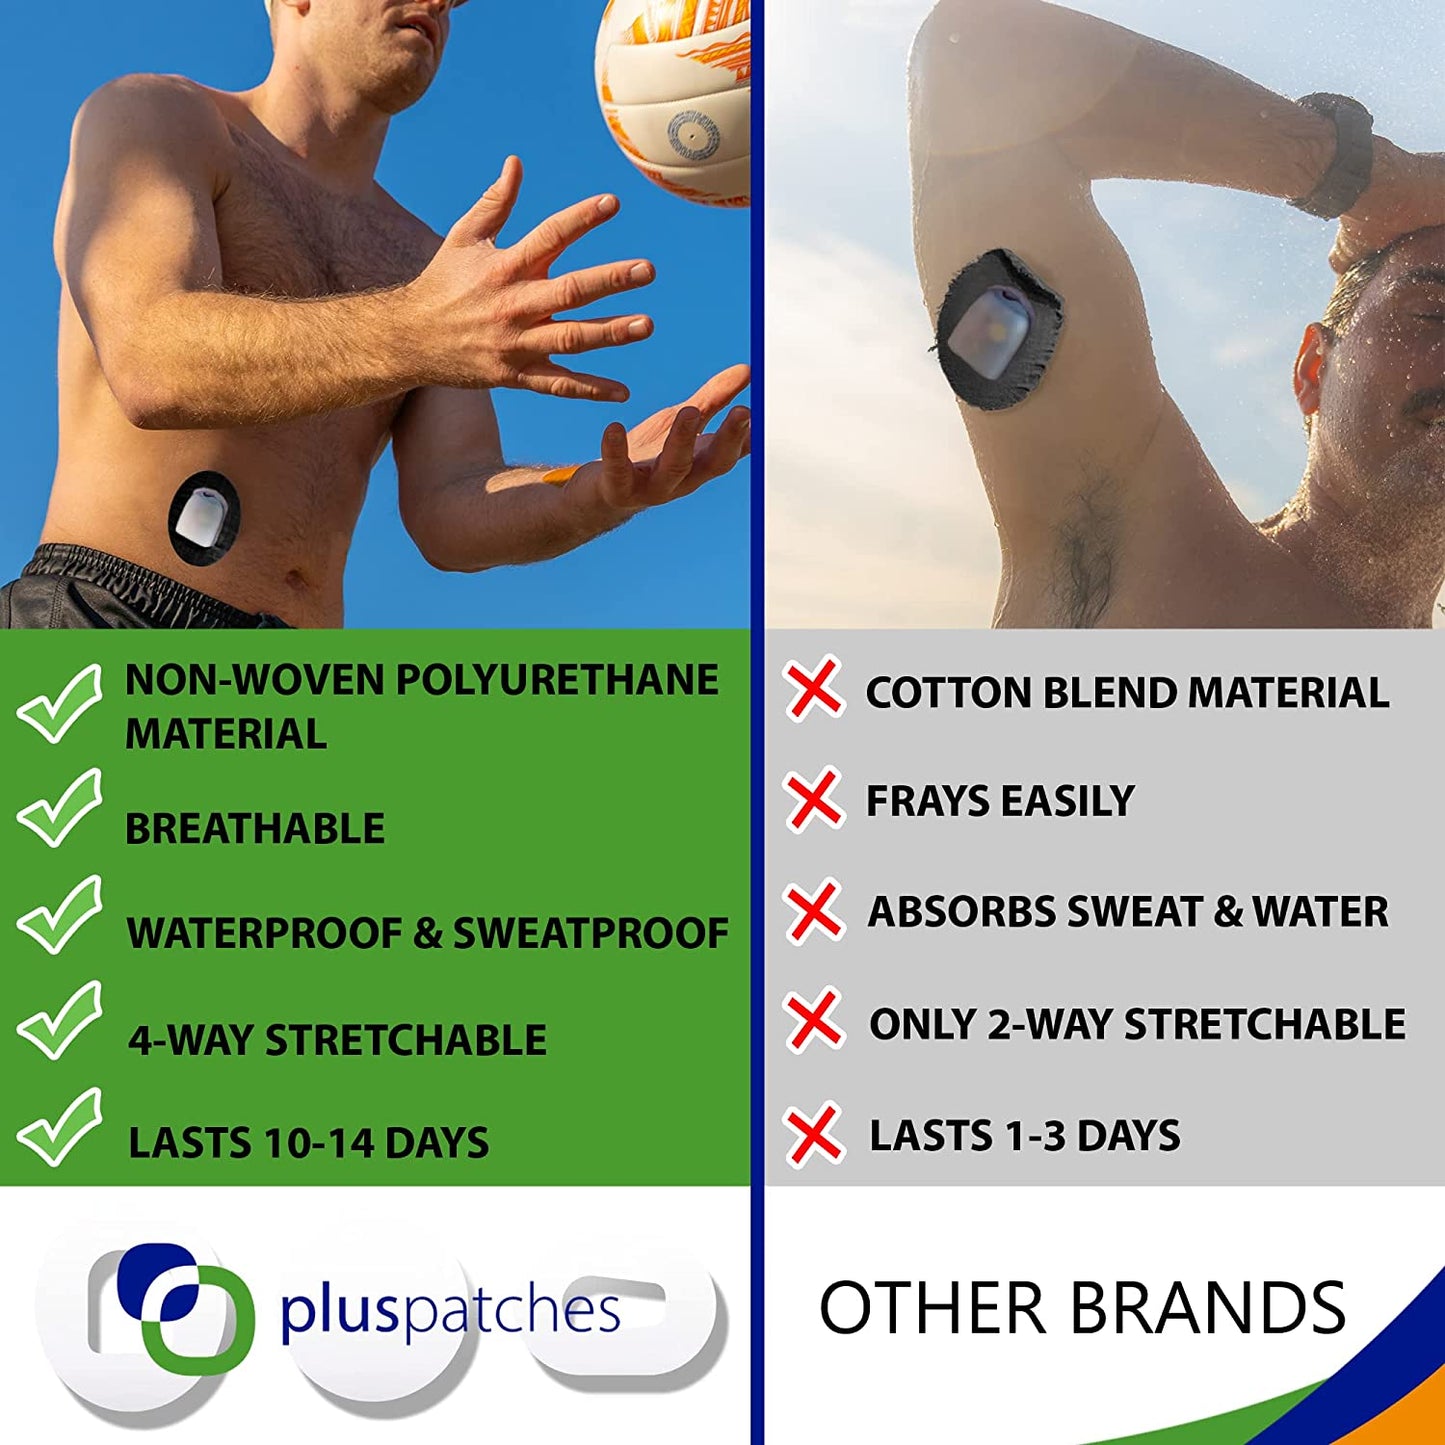 Plus Patches Insulin Pump Overlay / Cover Tape have 10-14 days holding power on your skin. The materials on the Plus Patches are designed for maximum wear time, with NO FRAYING or edge lift! The Polyurethane non-woven backing moves with your body (all around stretch) for ultimate comfort over the life of your overlay/ cover tape patch.